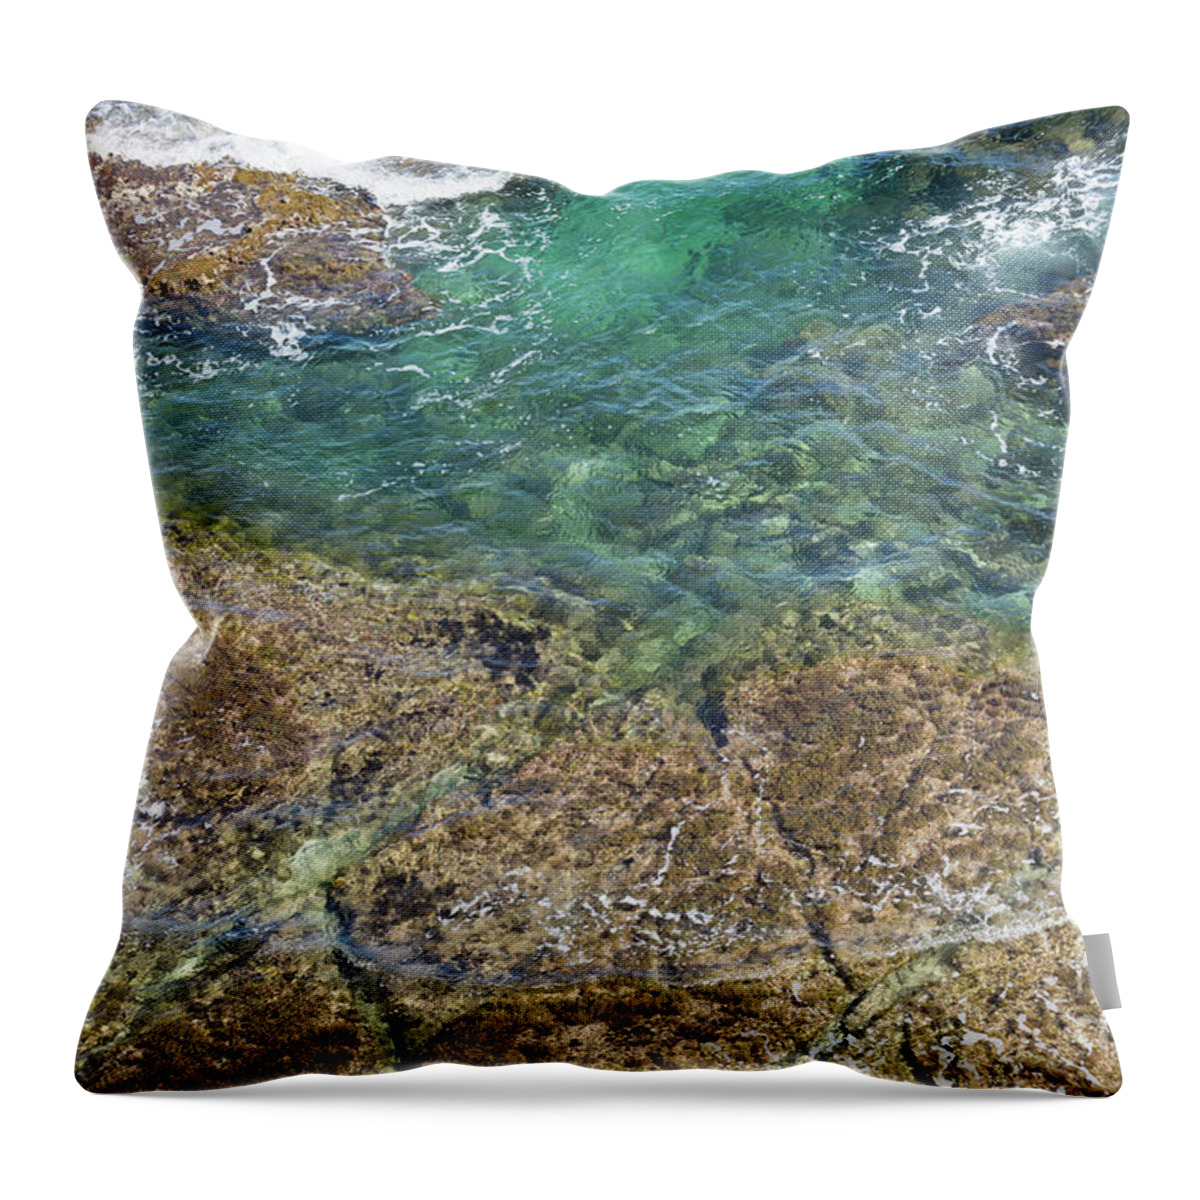 Flowing Throw Pillow featuring the photograph Turquoise Blue Water And Rocks On The Coast by Adriana Mueller